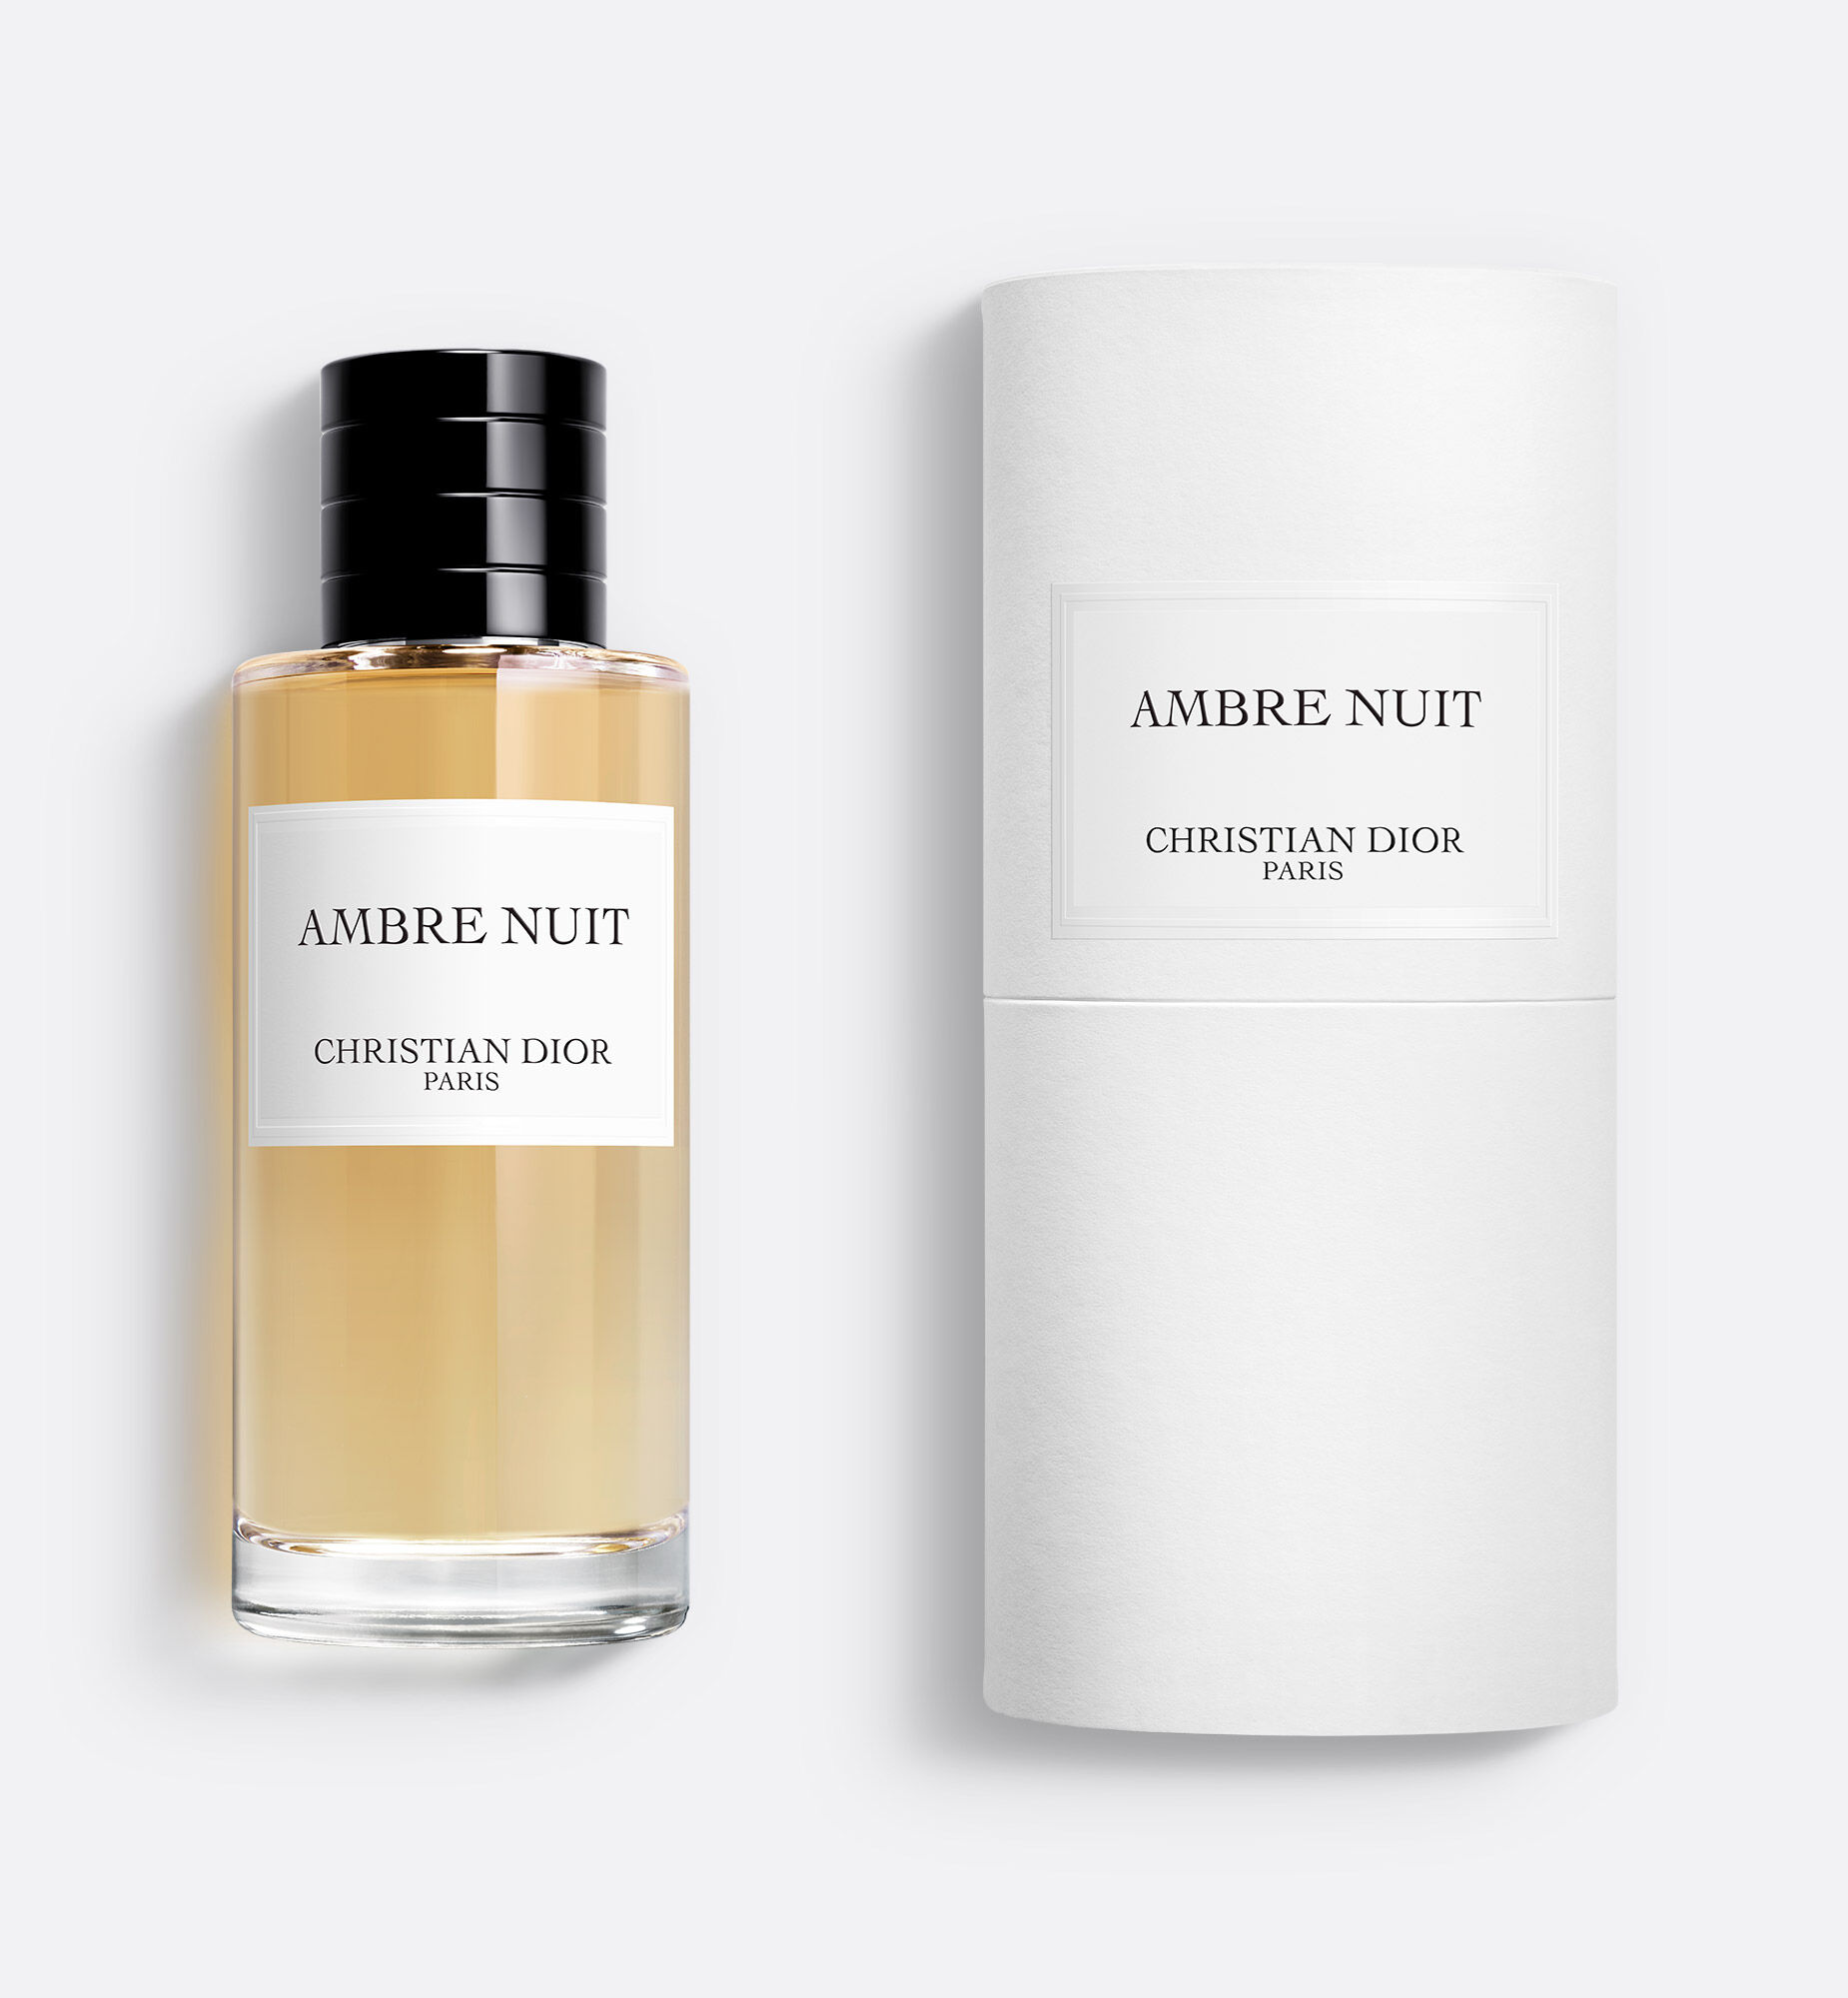 Ambre Nuit fragrance: the unisex & mysterious oriental fragrance 